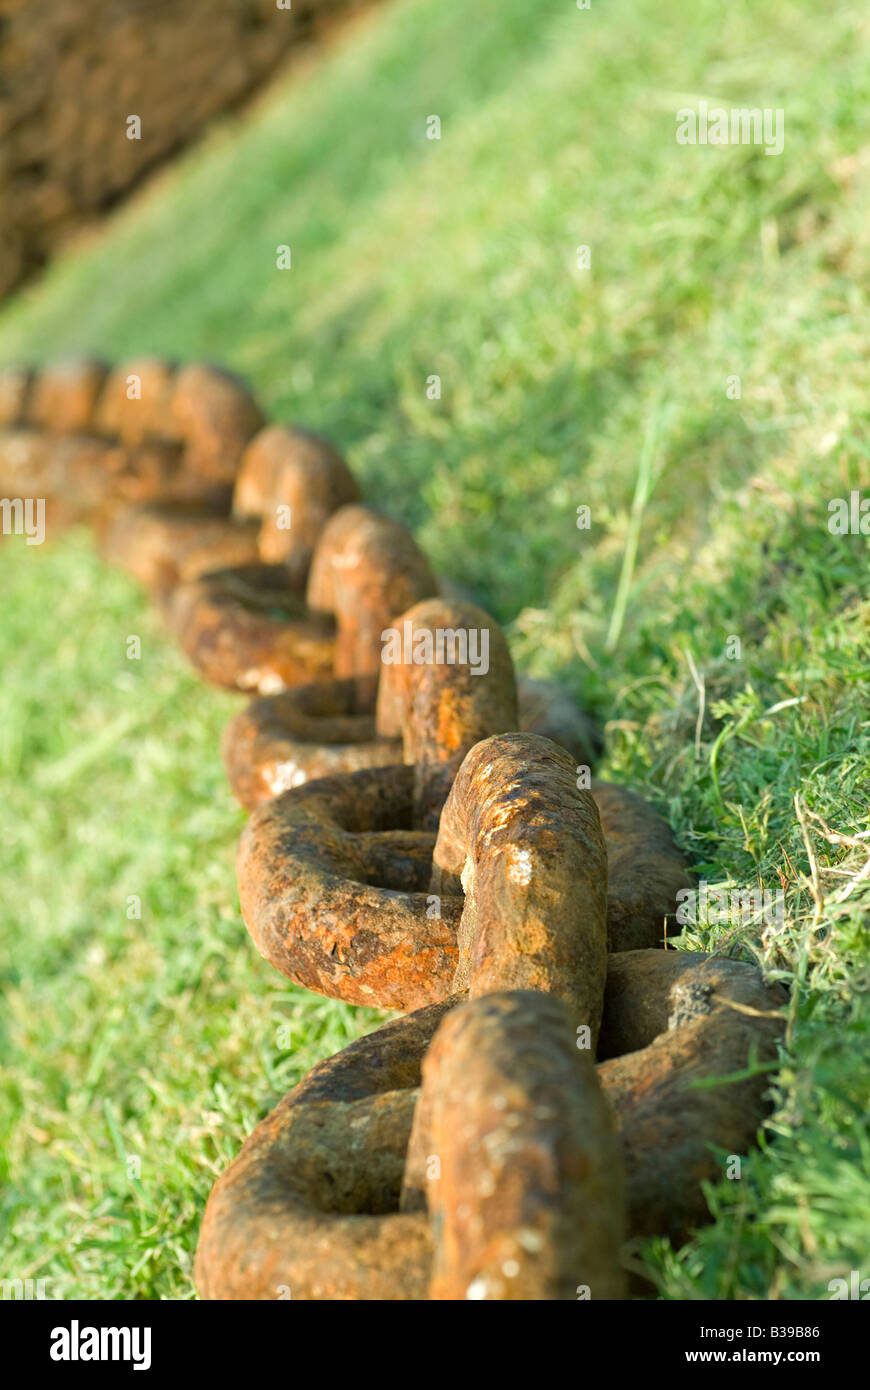 long old rusty iron chain lying on grass Stock Photo